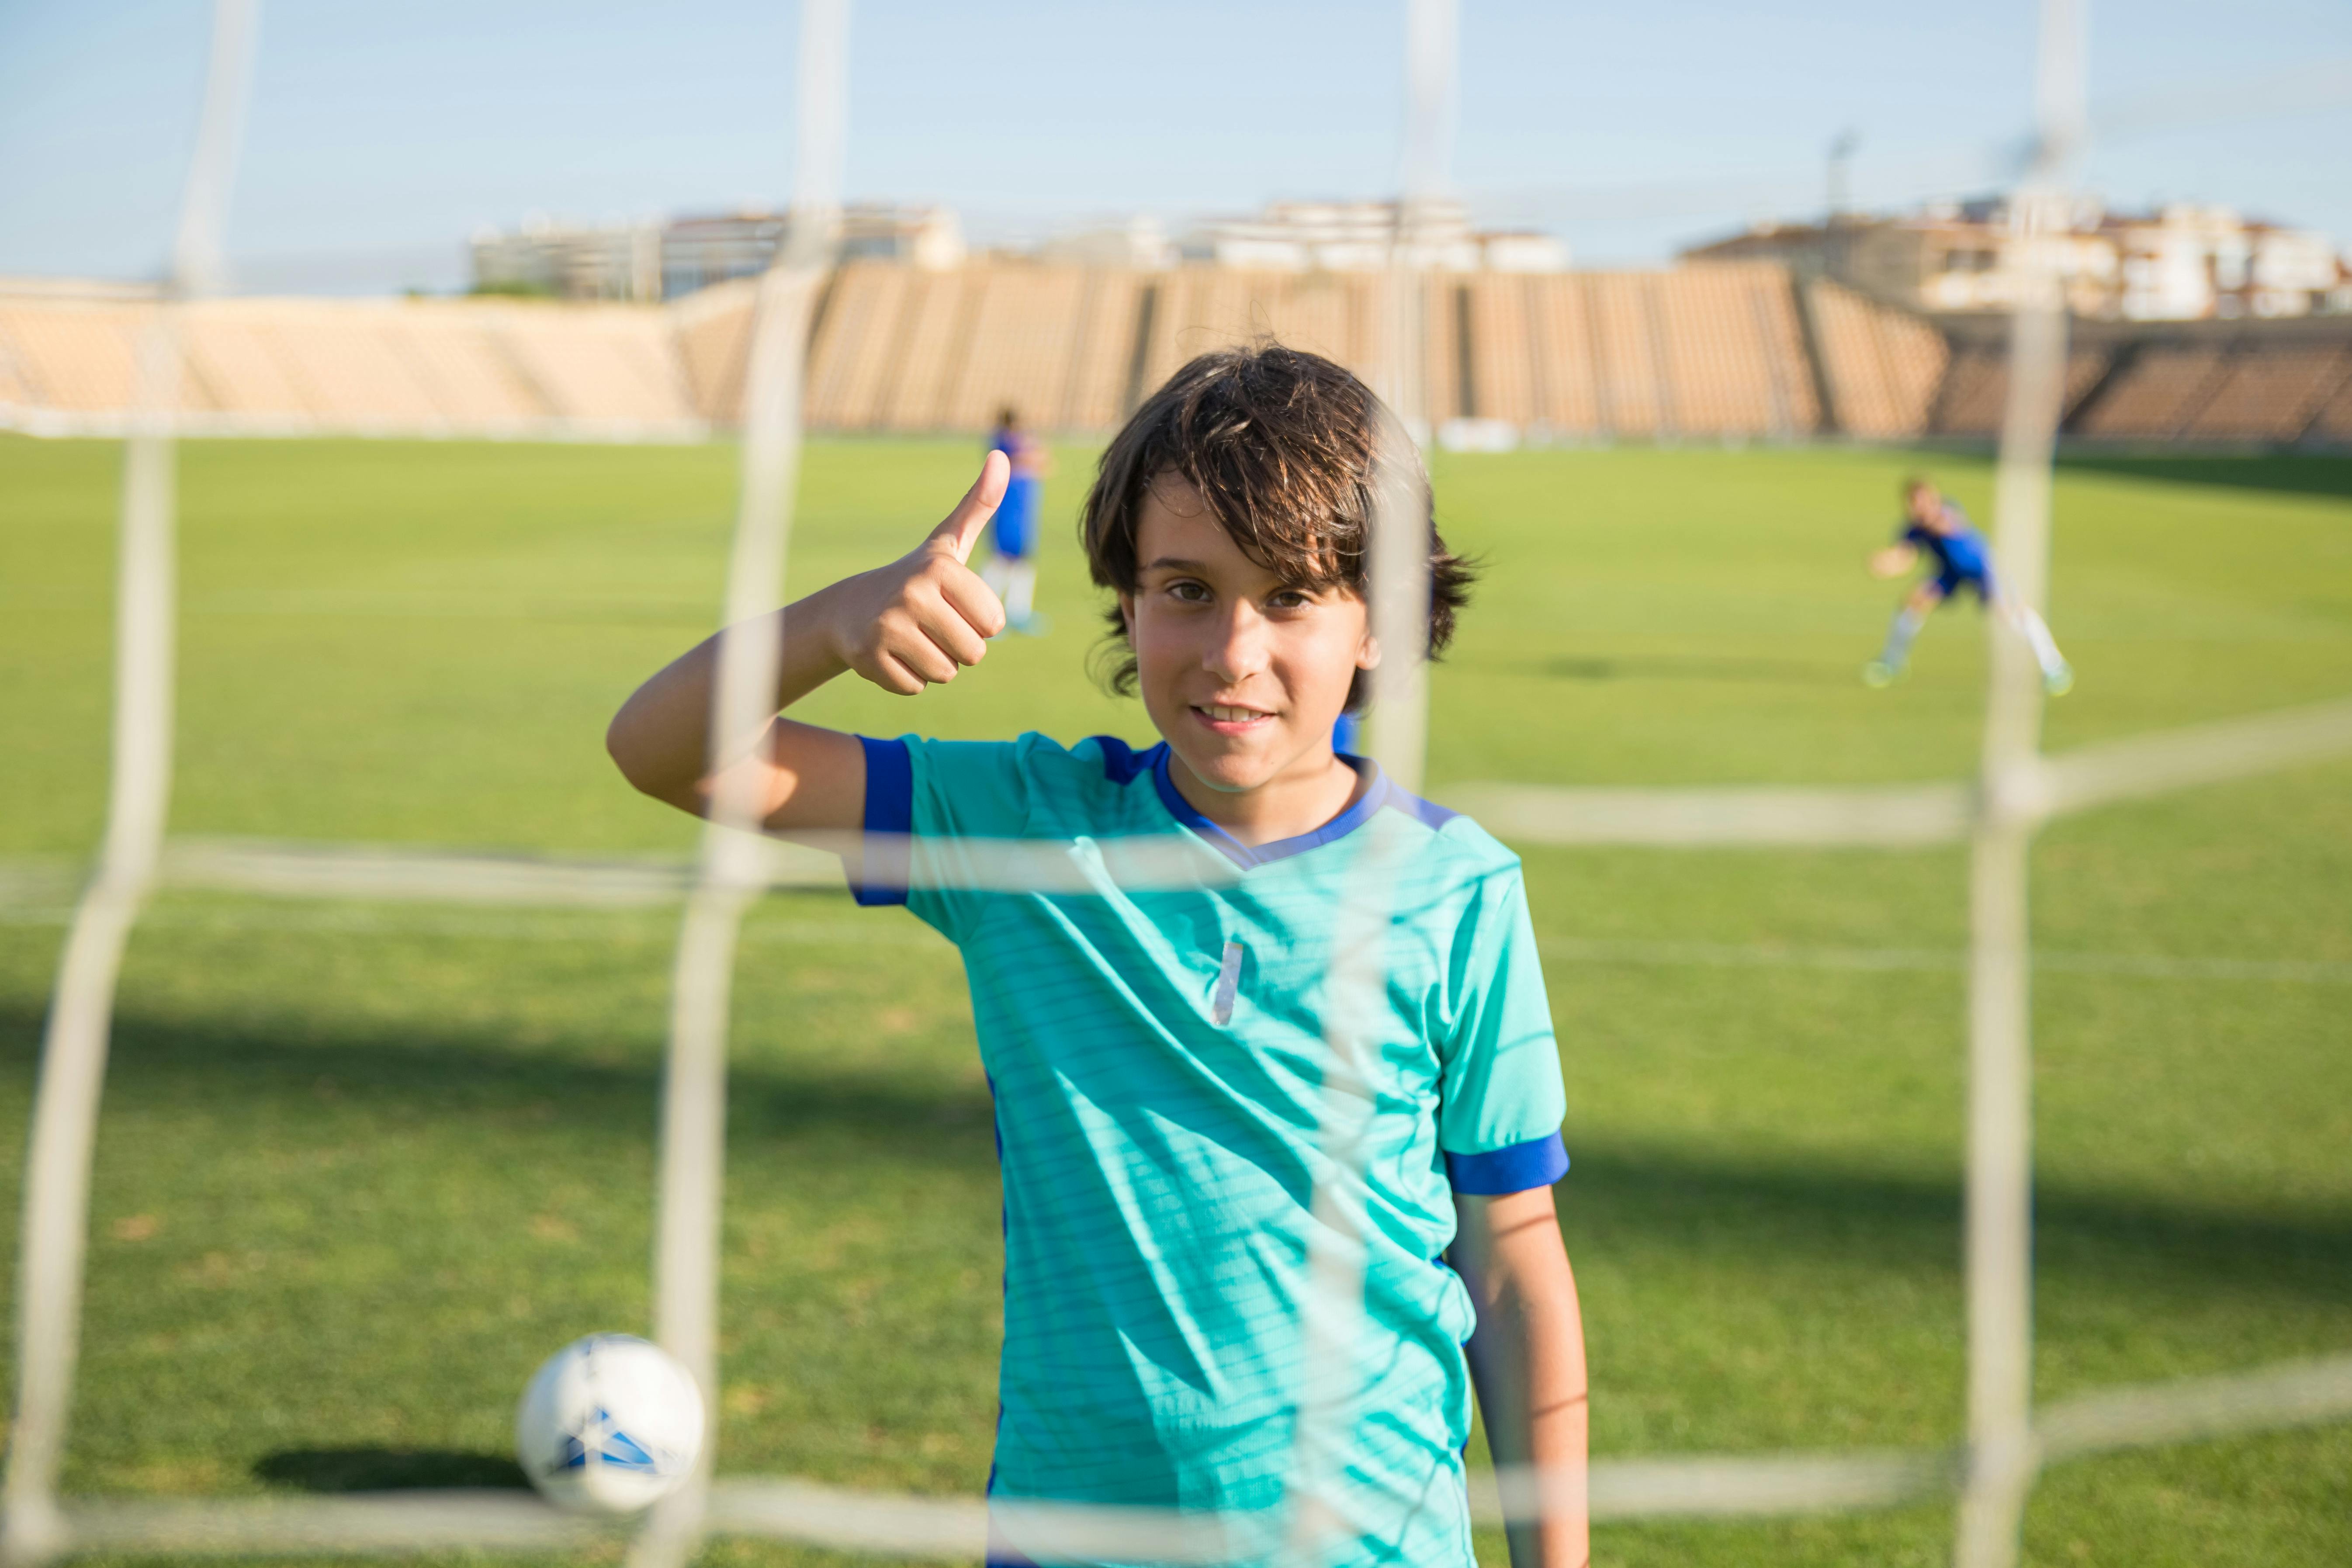 a young boy doing thumbs up sign while on the field